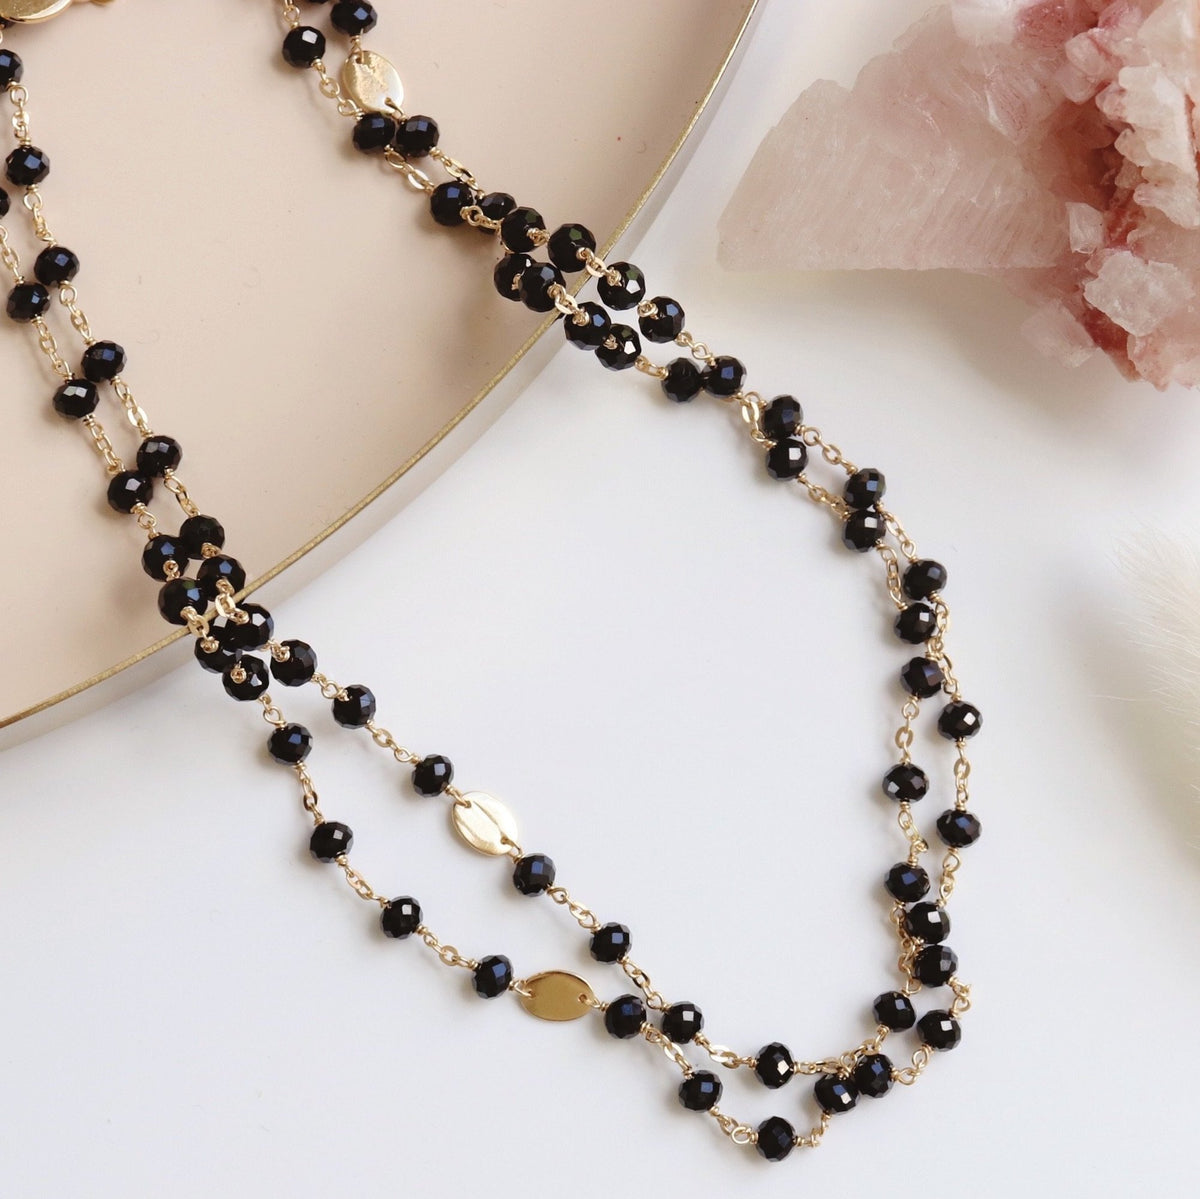 ICONIC SHORT BEADED NECKLACE - BLACK ONYX & GOLD 16-20 - SO PRETTY CARA  COTTER